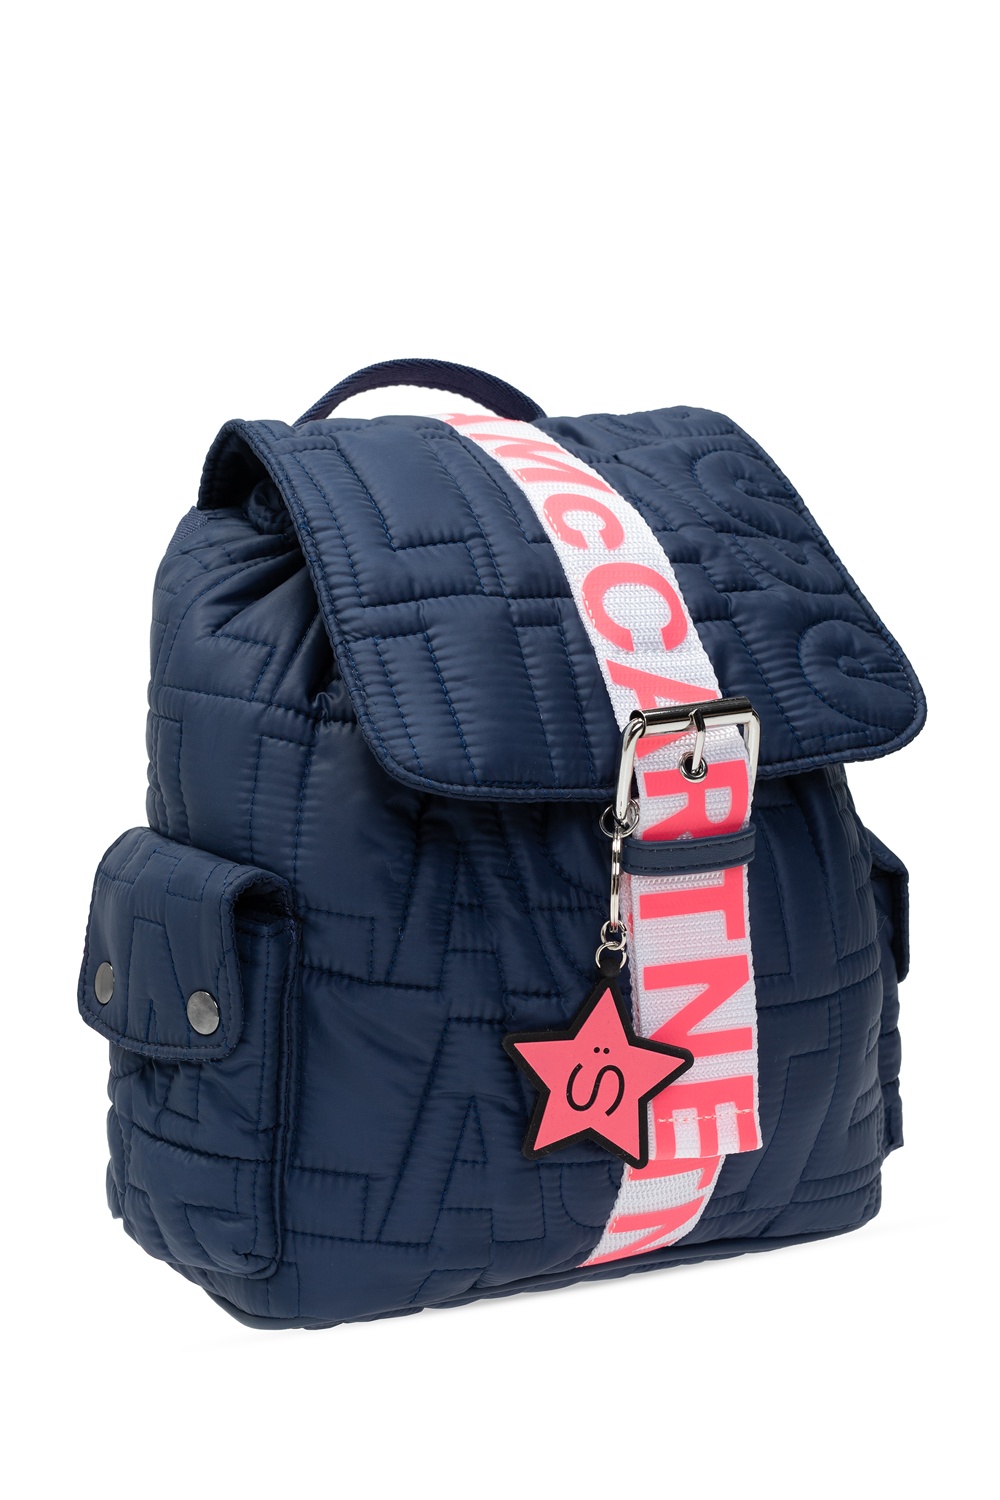 Stella McCartney Kids Quilted backpack